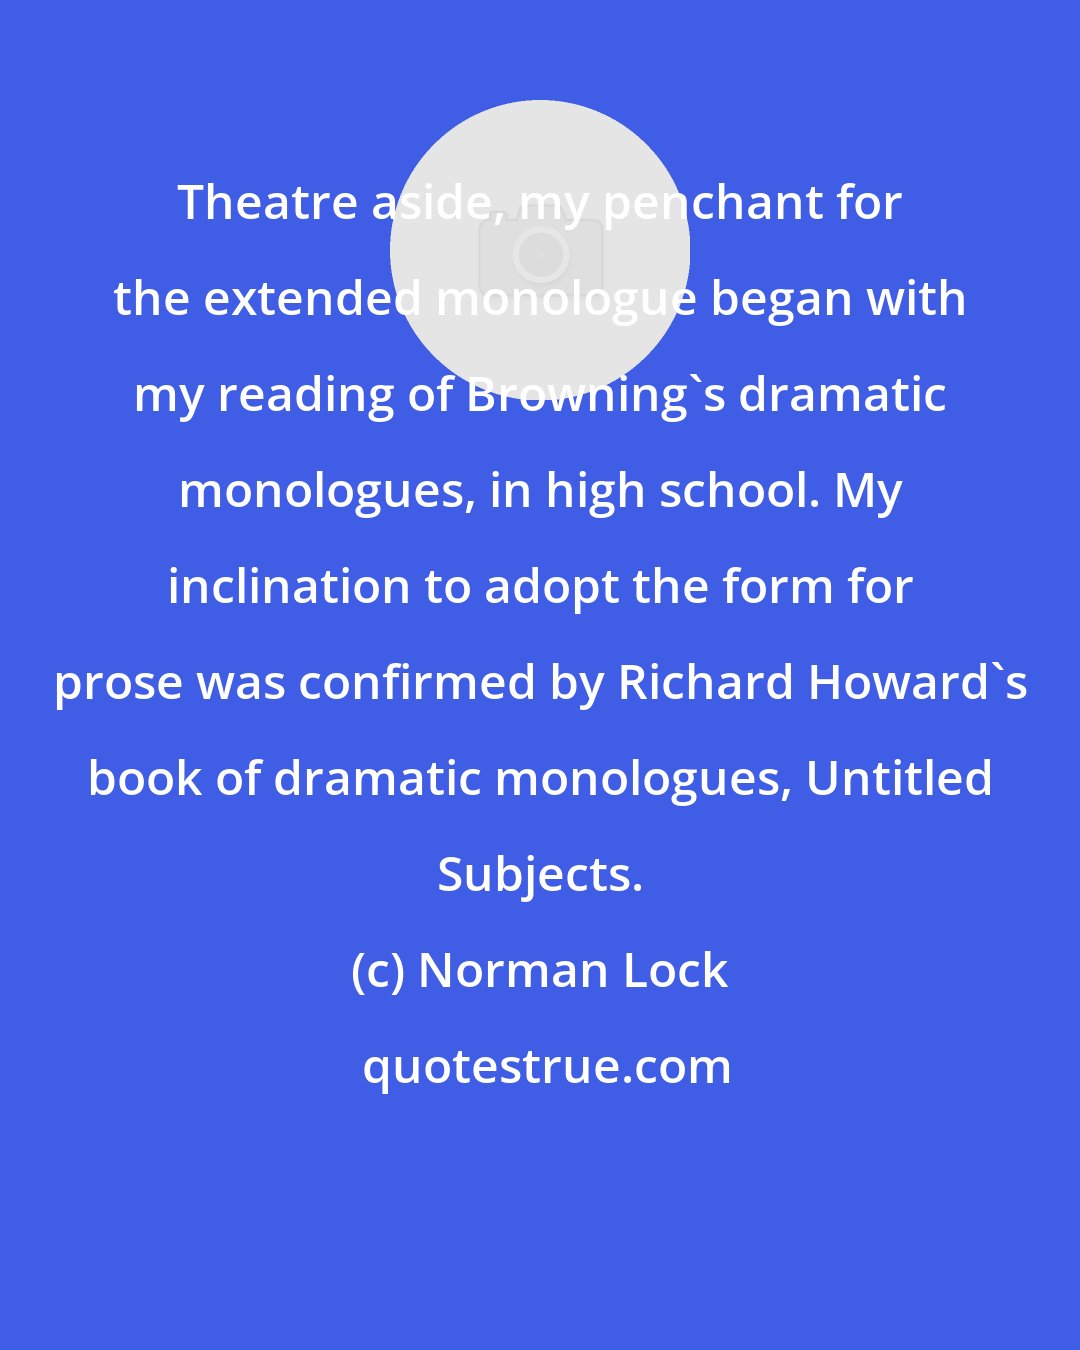 Norman Lock: Theatre aside, my penchant for the extended monologue began with my reading of Browning's dramatic monologues, in high school. My inclination to adopt the form for prose was confirmed by Richard Howard's book of dramatic monologues, Untitled Subjects.